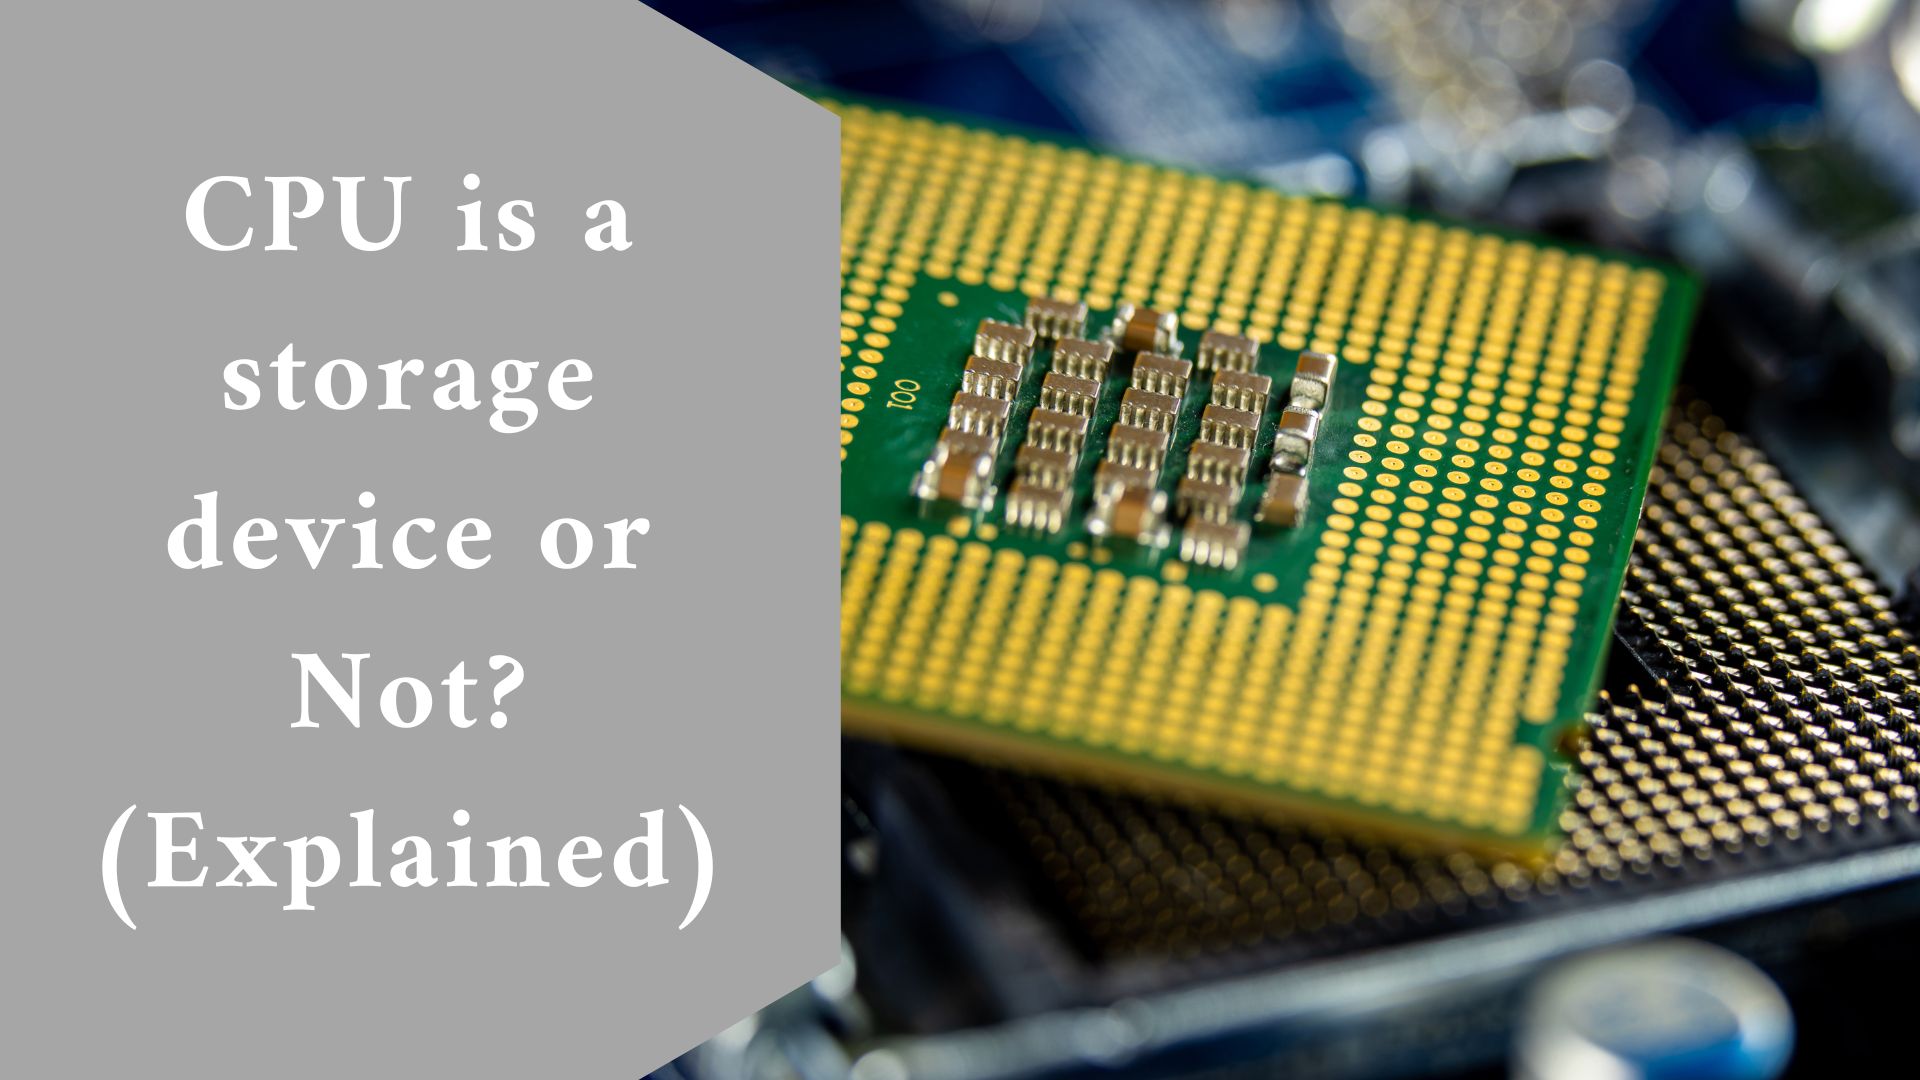 CPU is a storage device or Not? (Explained)